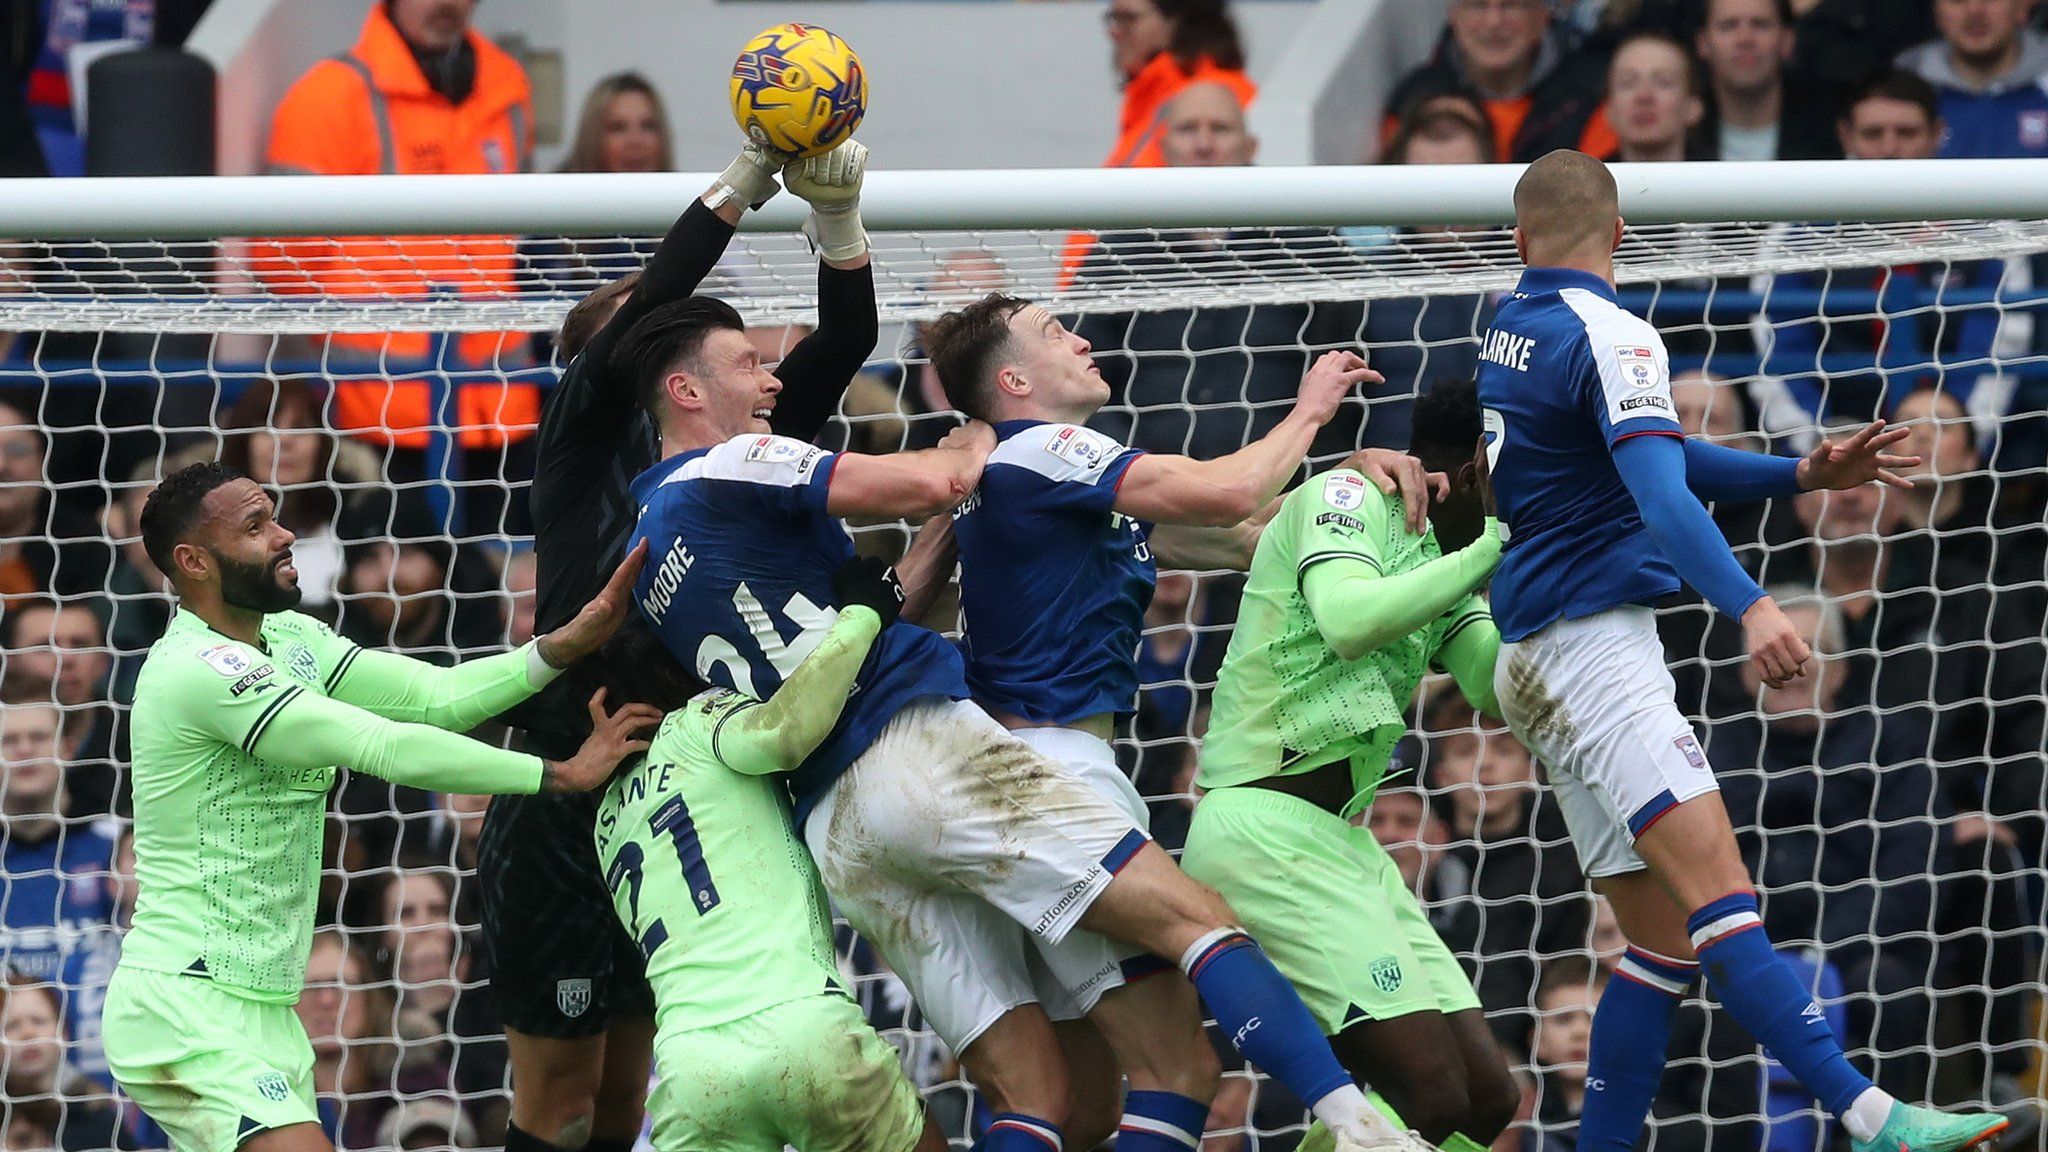 Ipswich have an attack on the West Bromwich Albion goal